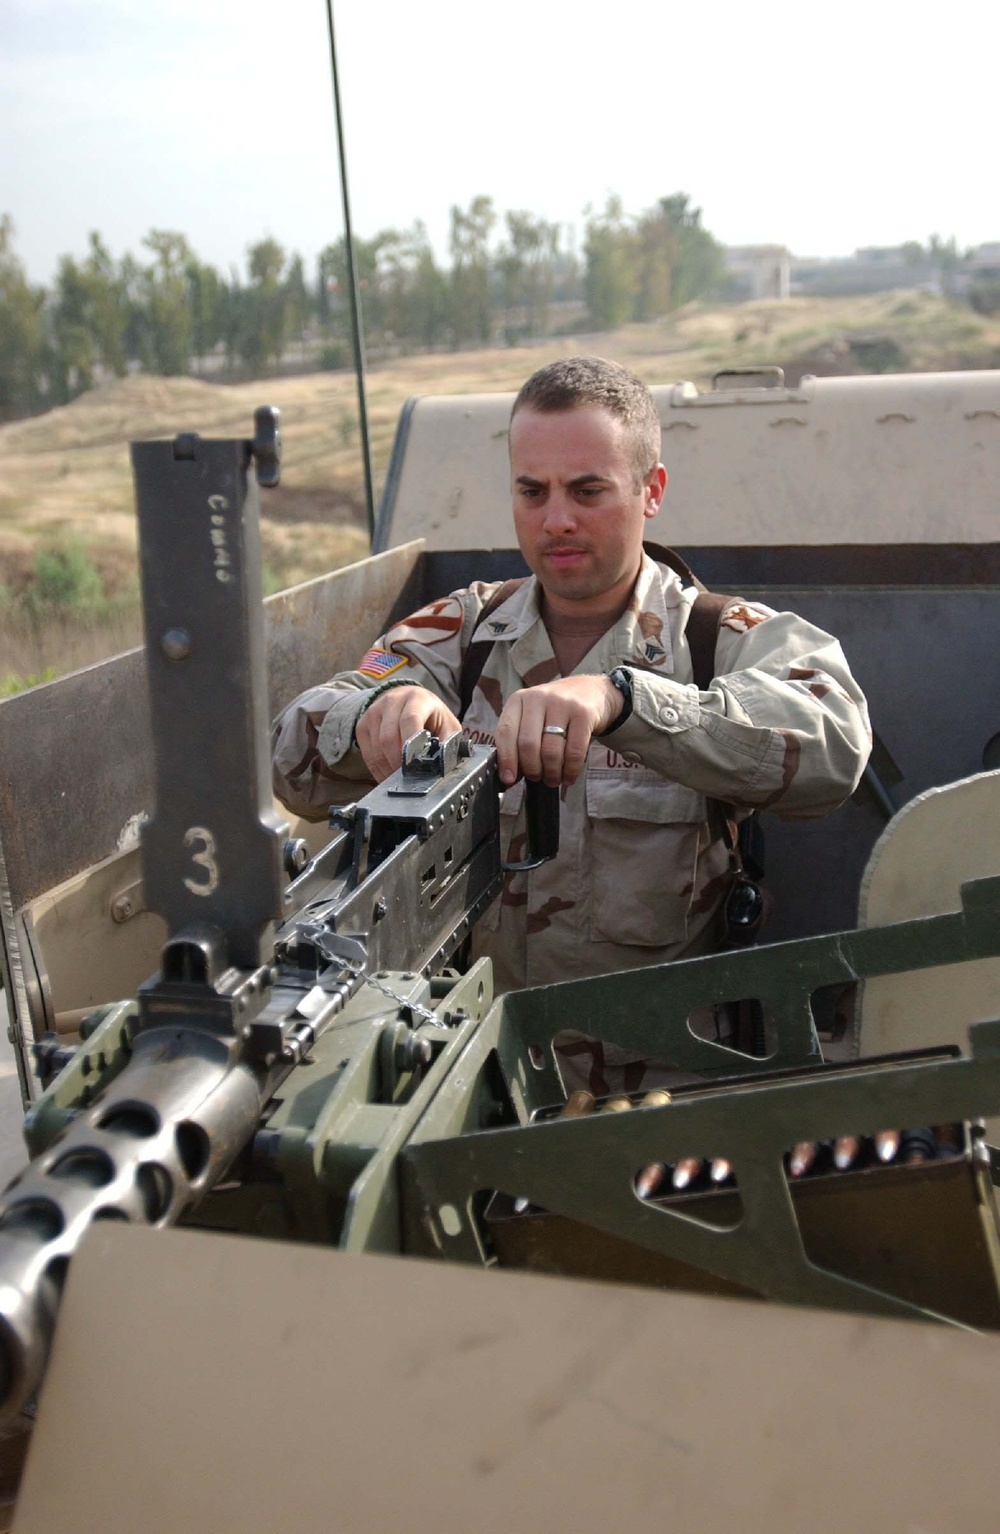 Sgt. Comire prepares his equipment prior to a mission